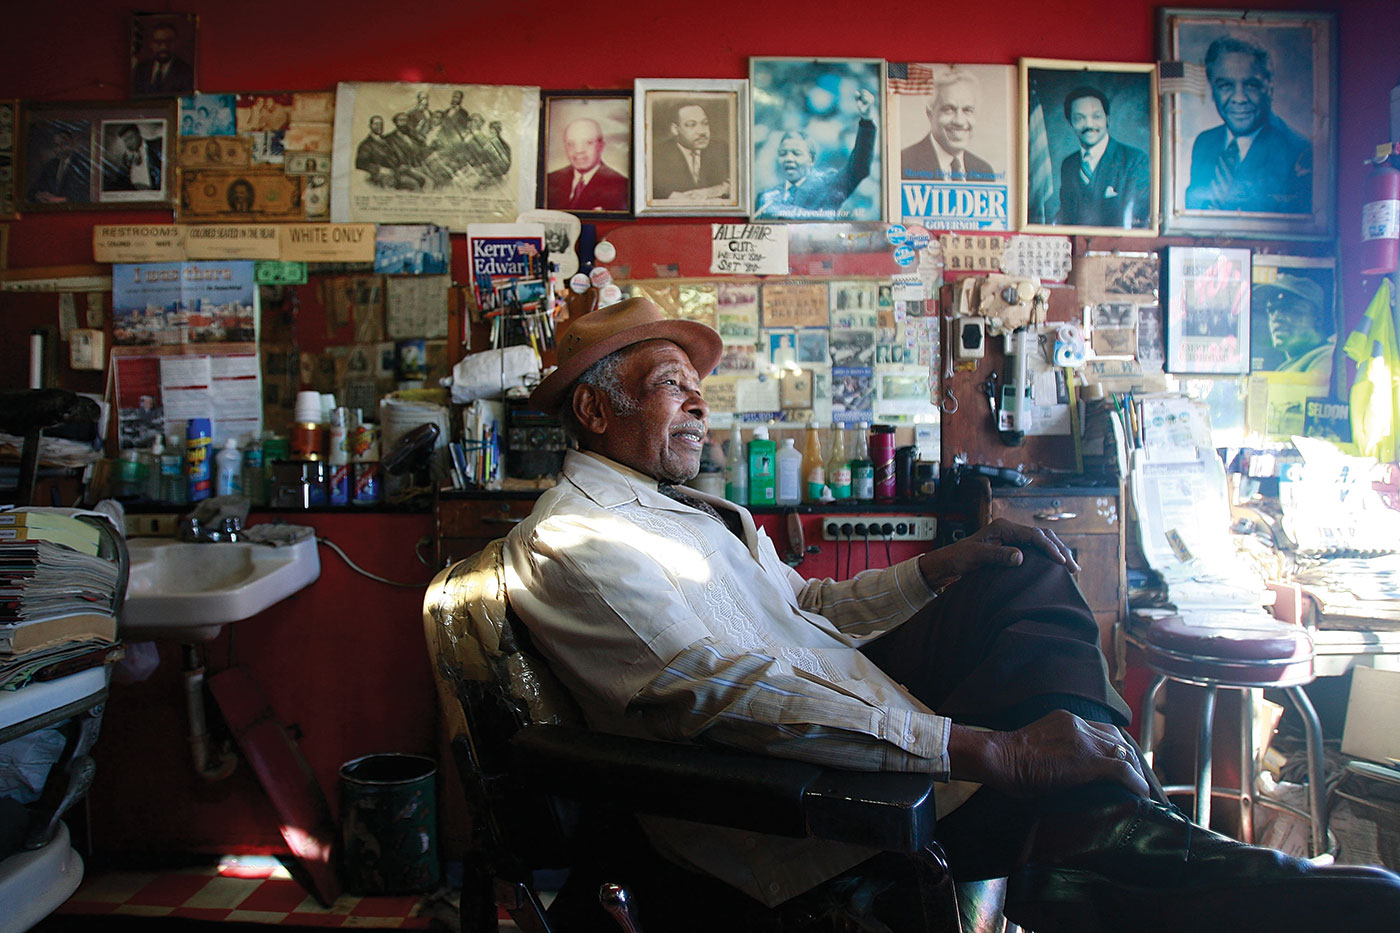 From Barbershops to Procedure Rooms, Charles R. Rogers Meets Black Men Where They Are